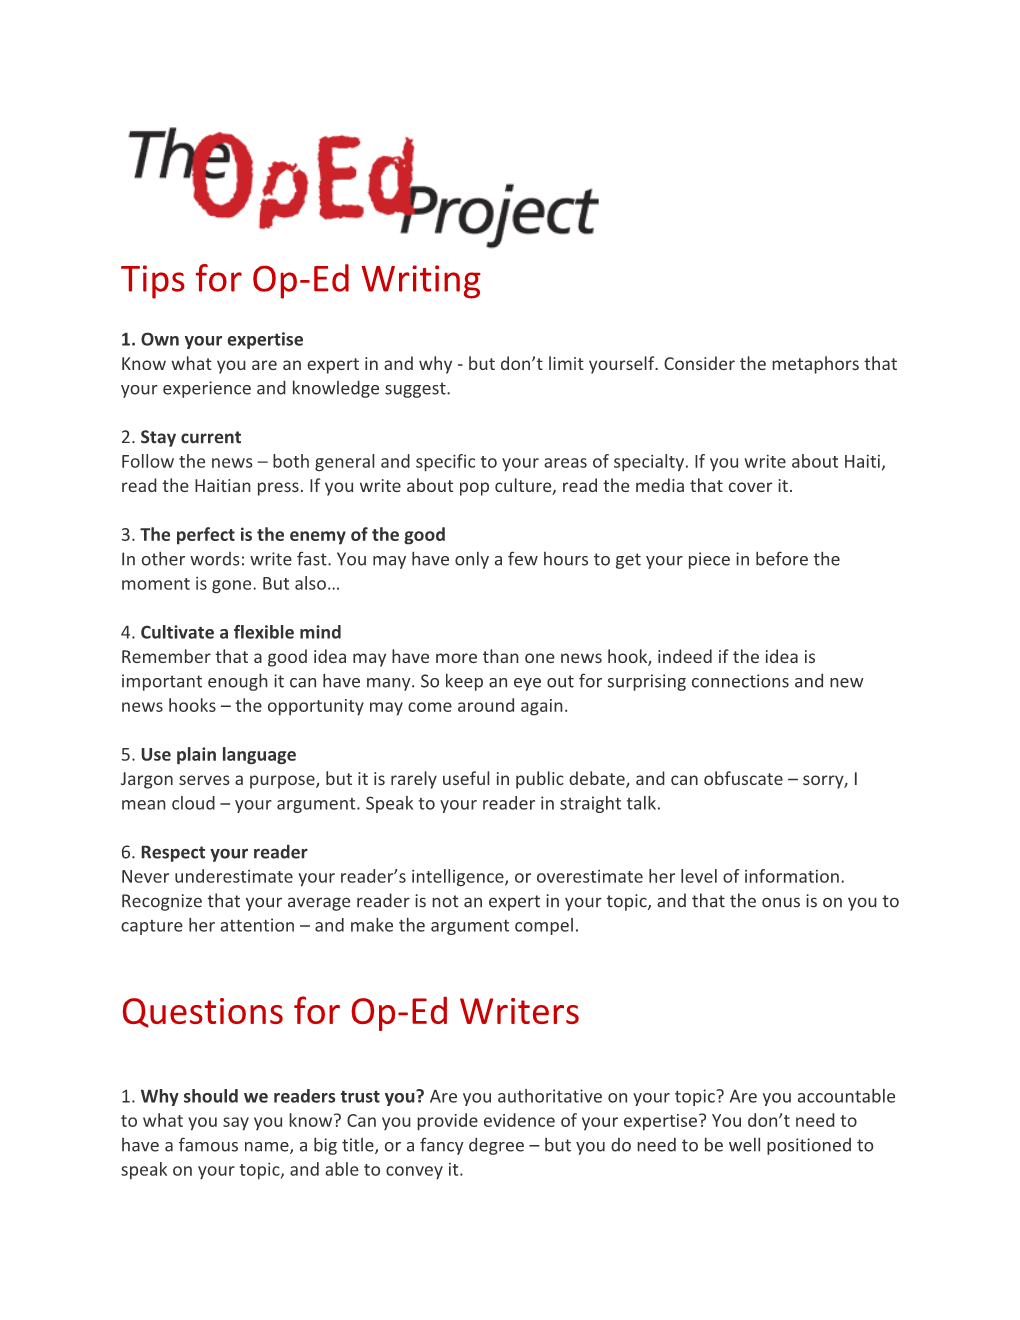 Tips for Op-Ed Writing